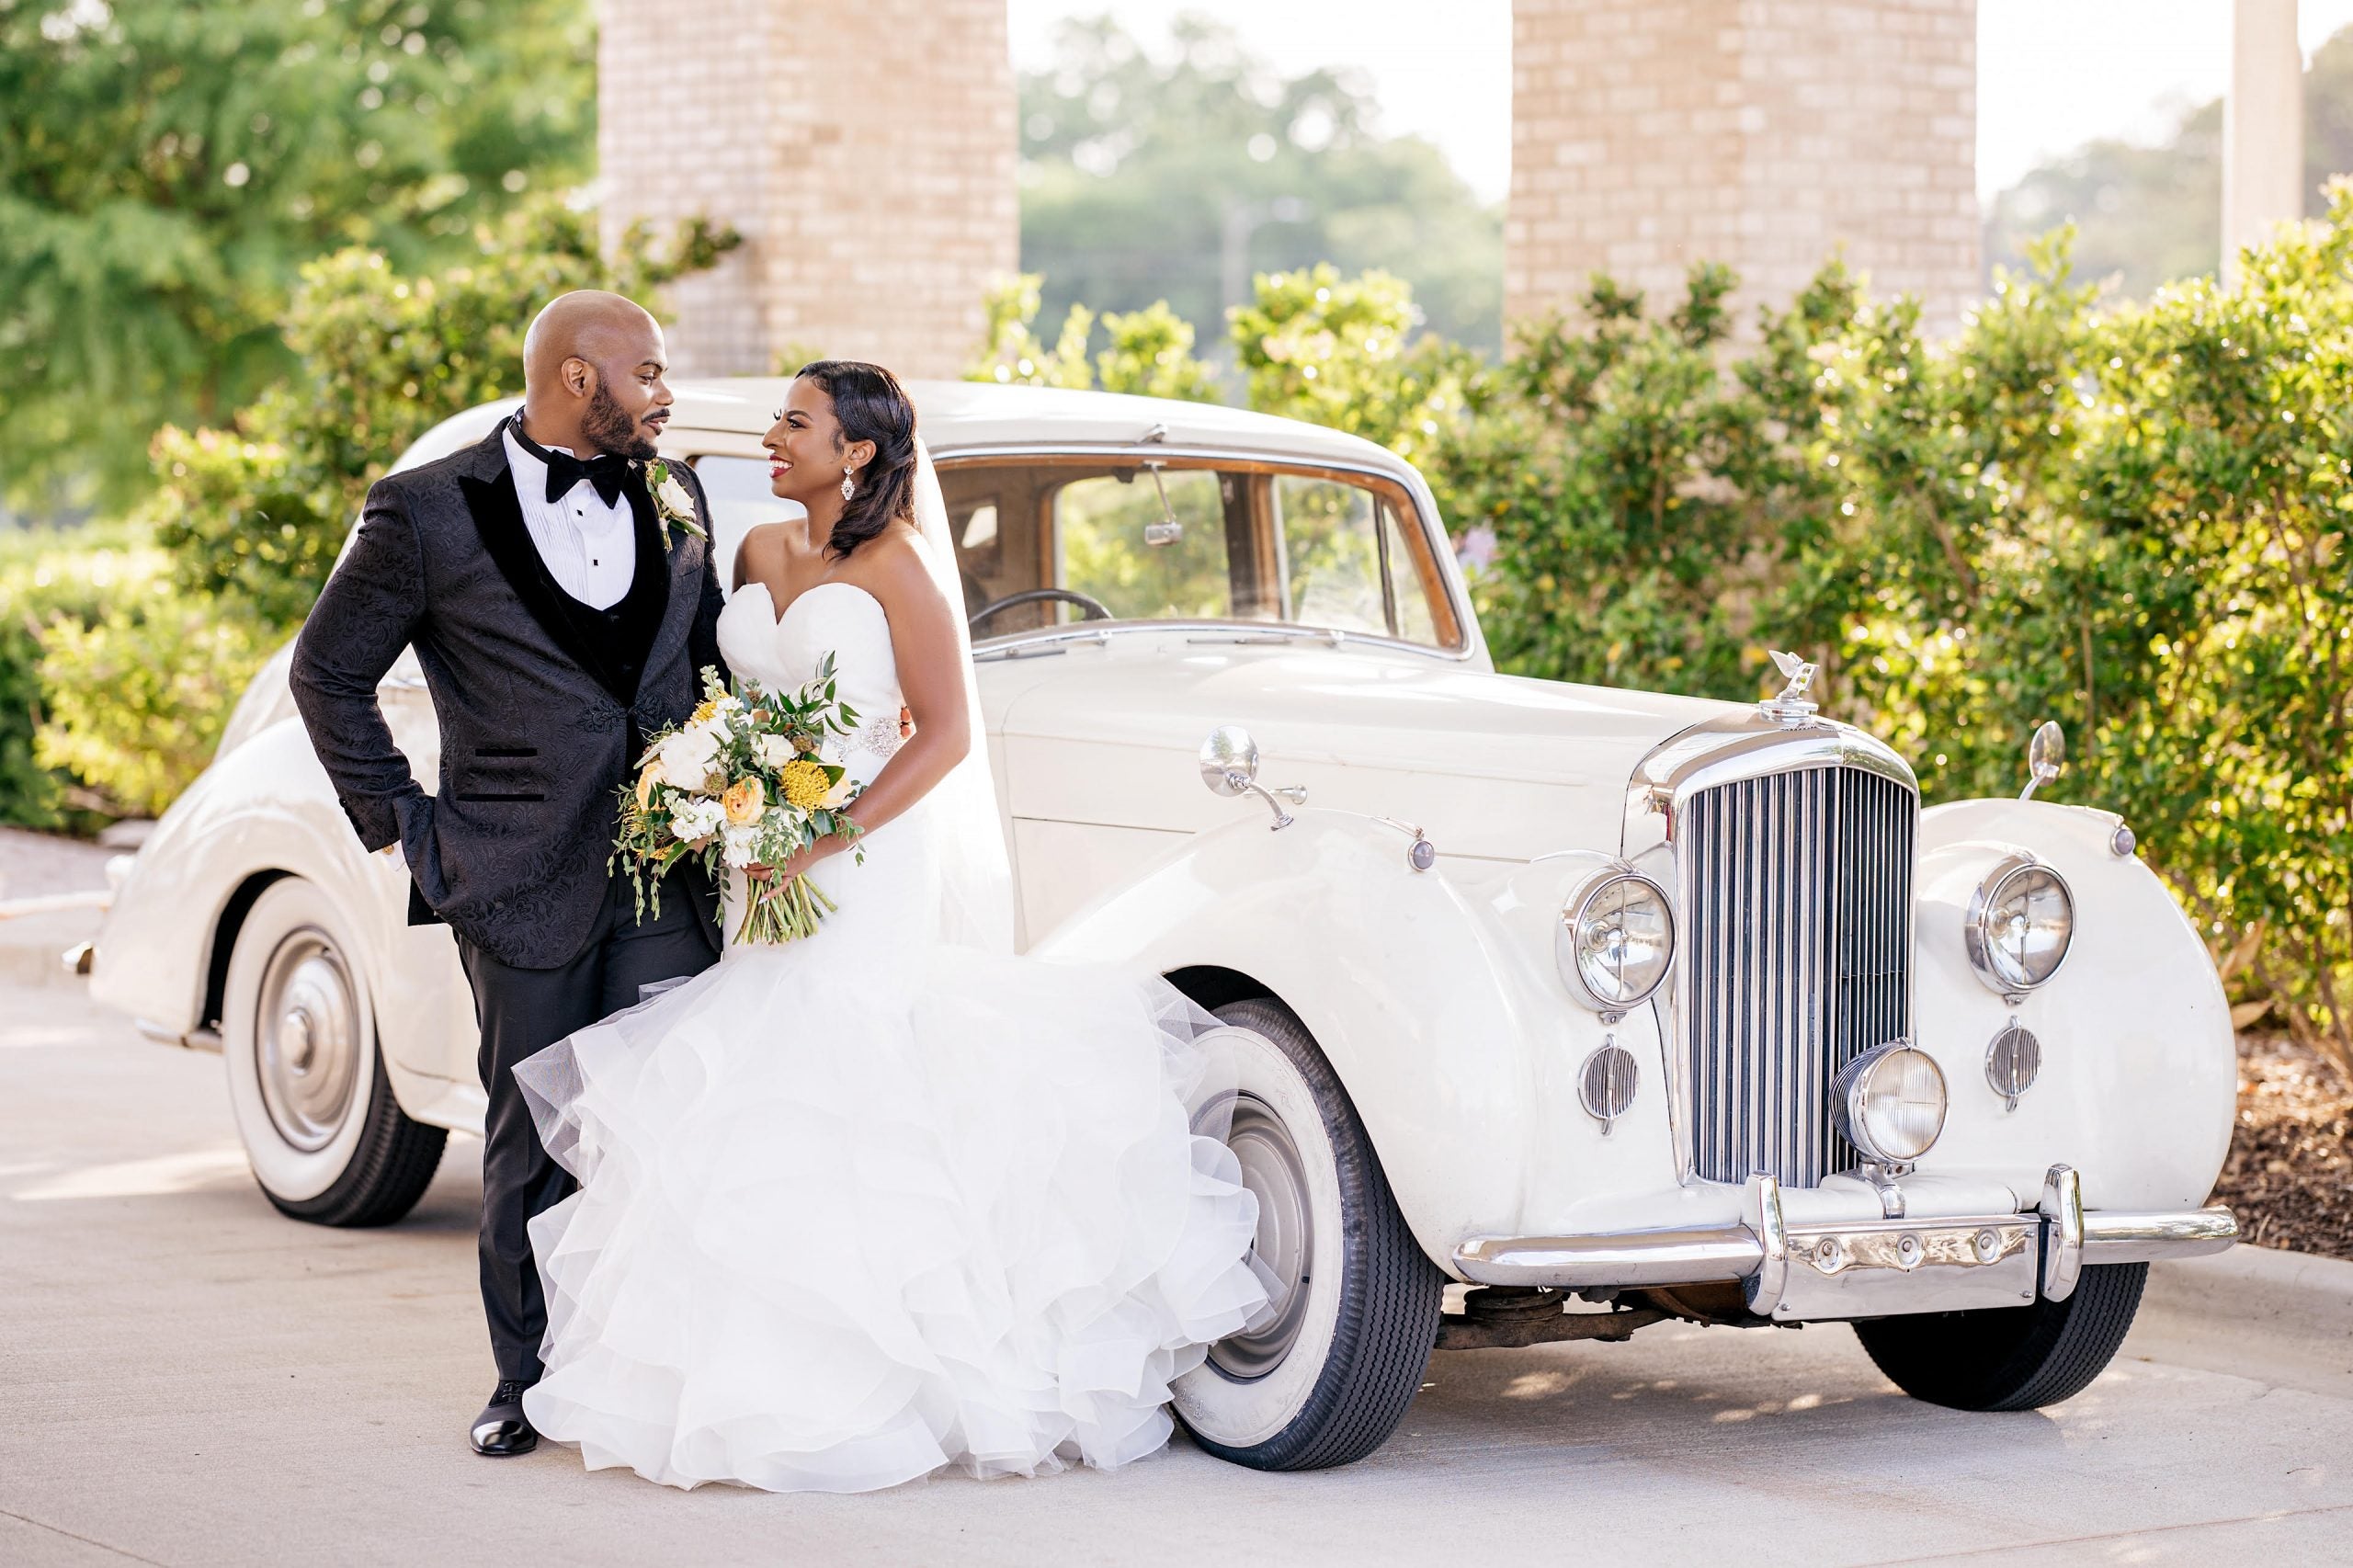 Bridal Bliss: After Manifesting Her Mr., Gavette And Eugene Said 'I Do' With A Big, Beautiful Wedding In Birmingham